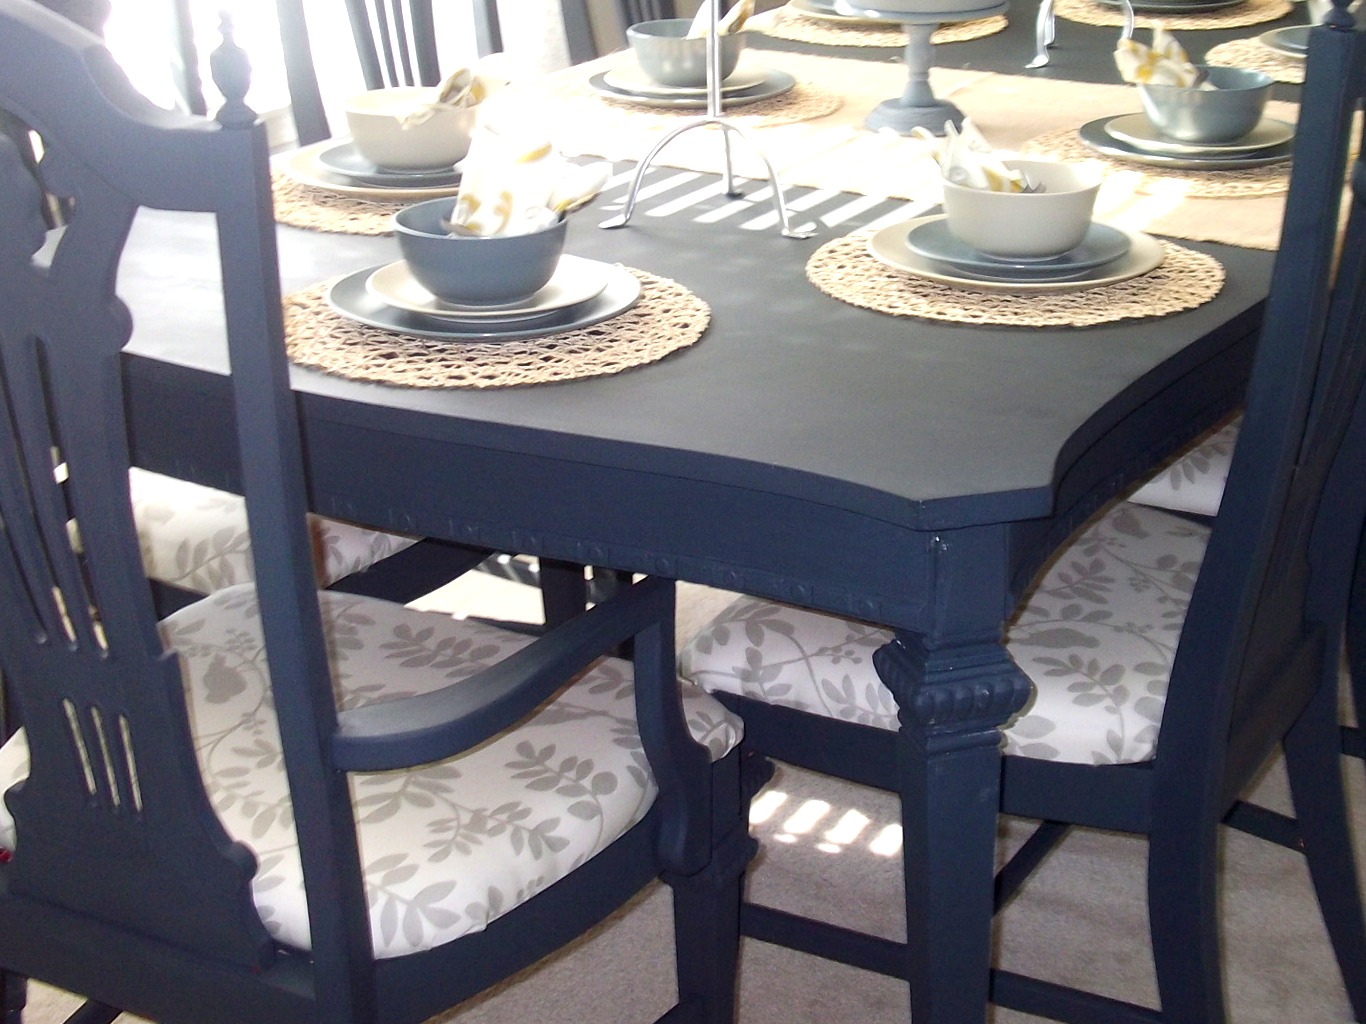 Dining Room Table Seats 8 Dimensions